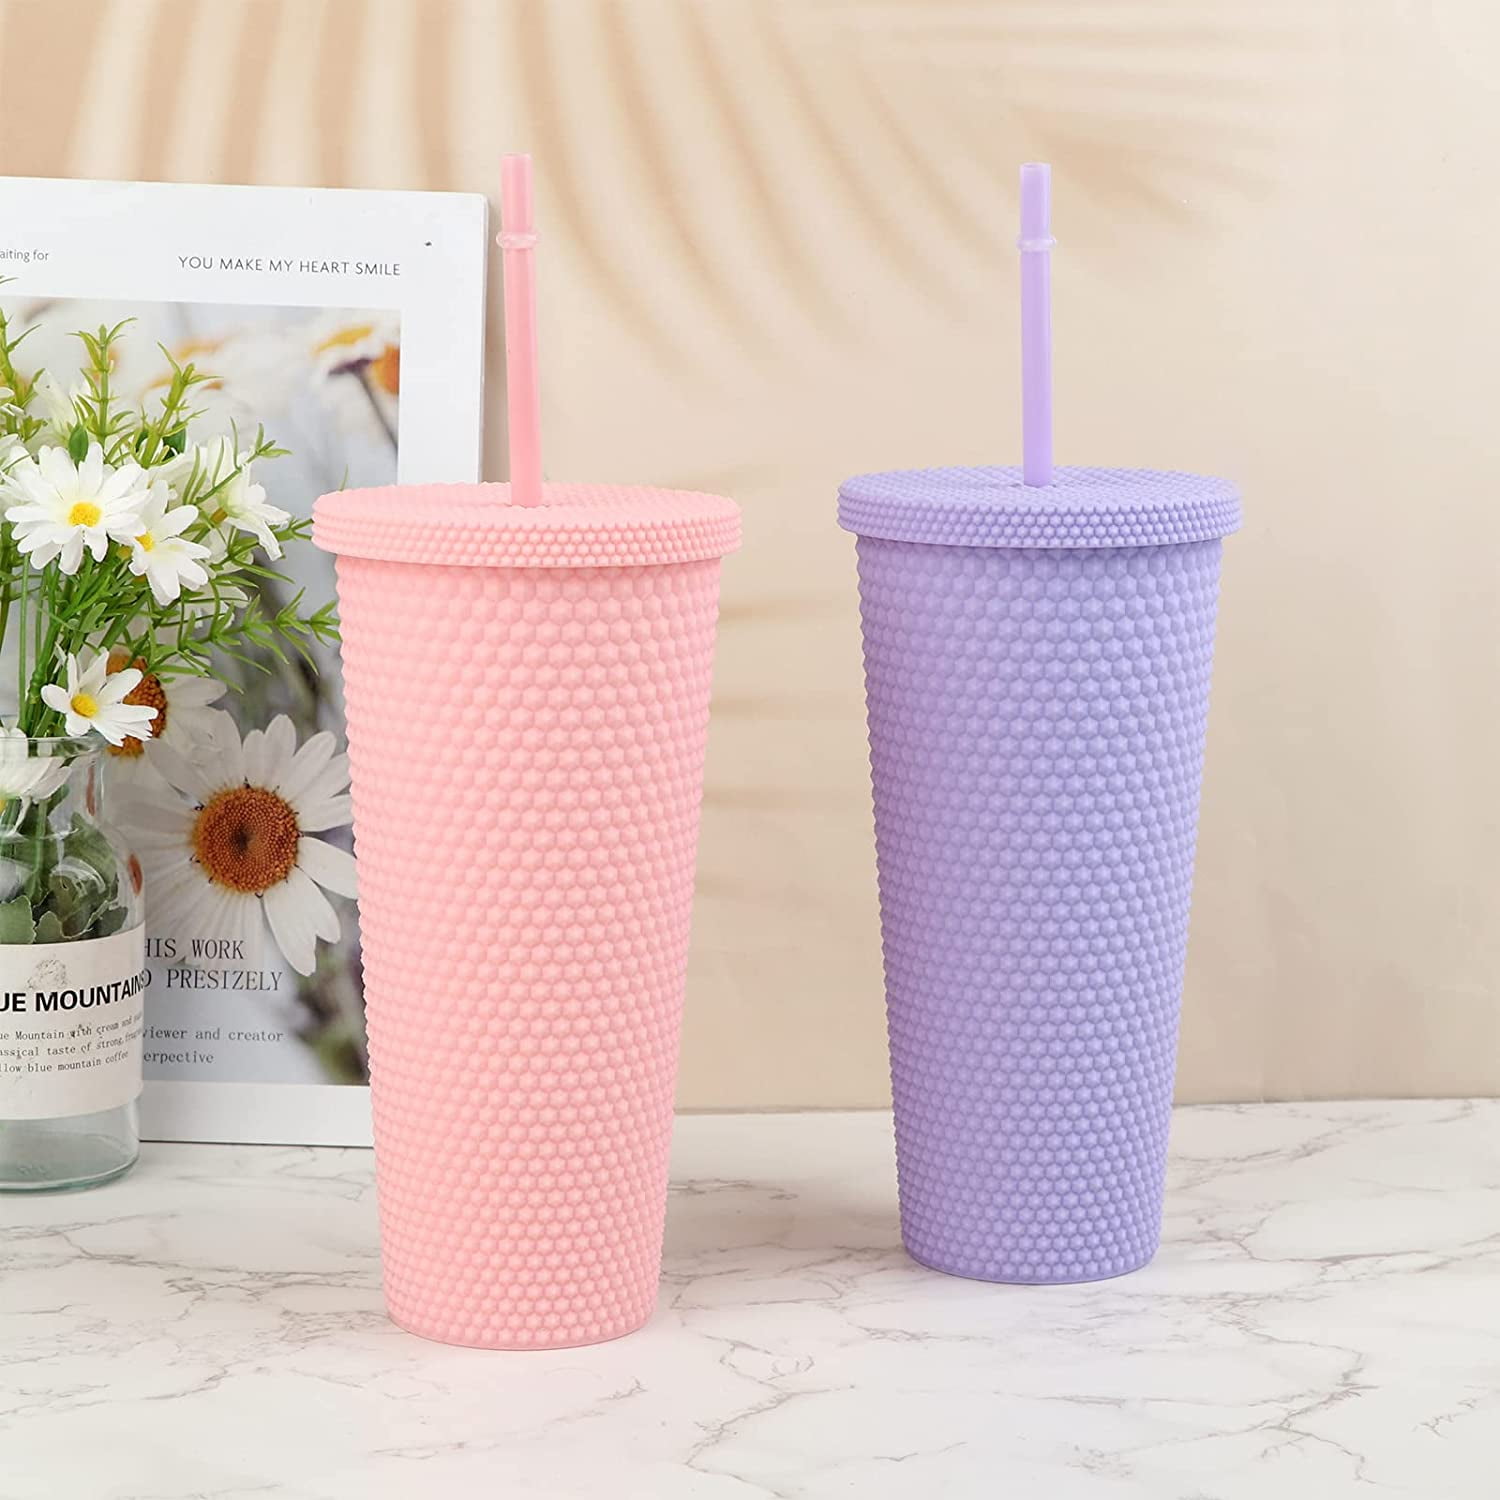 24 oz Studded Tumbler with Straw,Casewin Plastic Studded Tumbler Cup,Matte  Cups with lids and Straws,Iridescent, Matte and Multi Colored,with Lid and  Straw,Reusable, Suitable for Cold Drinks 